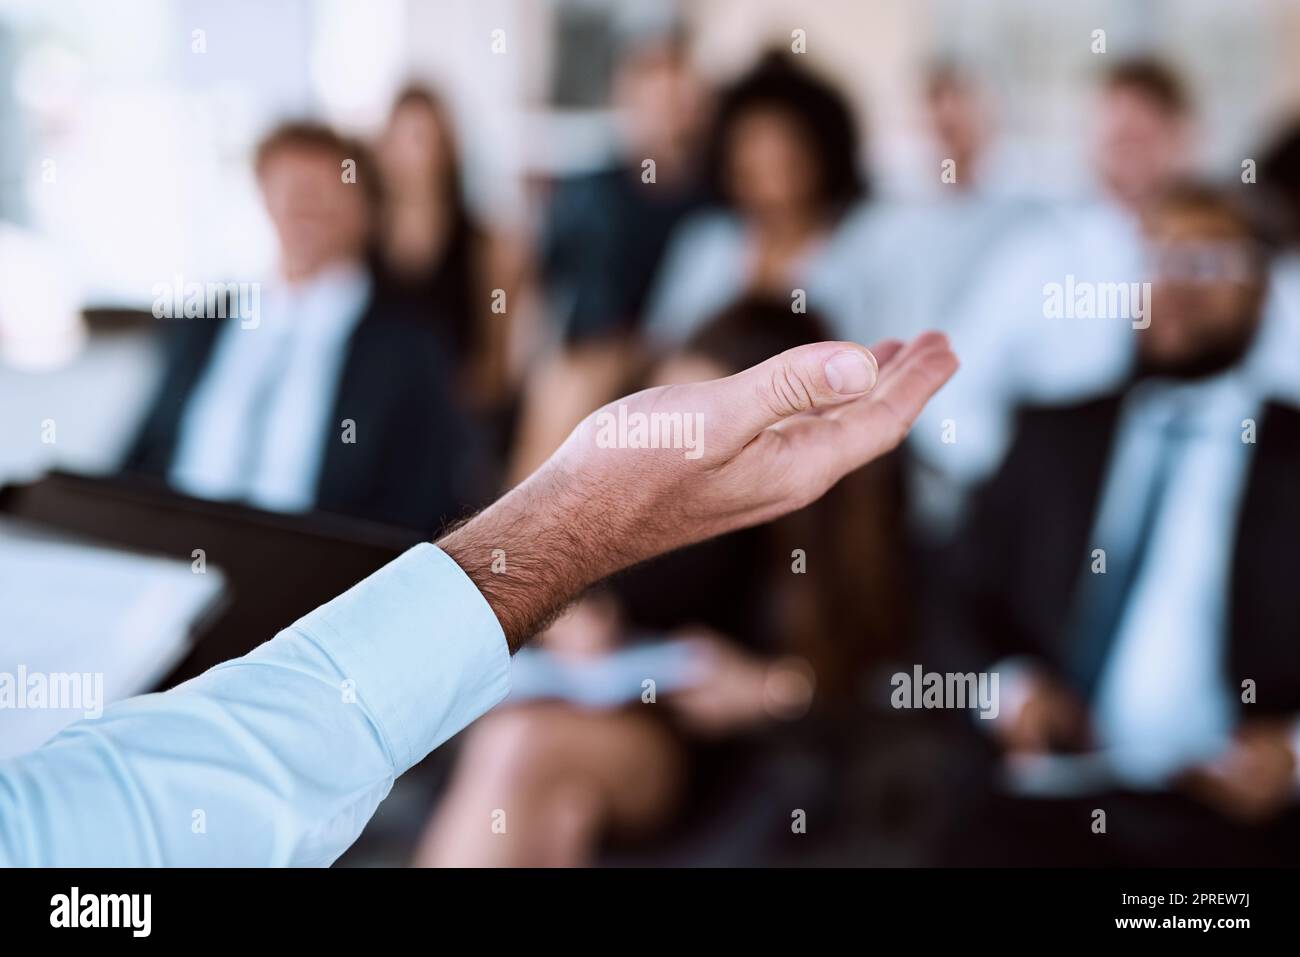 Presentation skills that are polished and professional. businesspeople attending a conference. Stock Photo